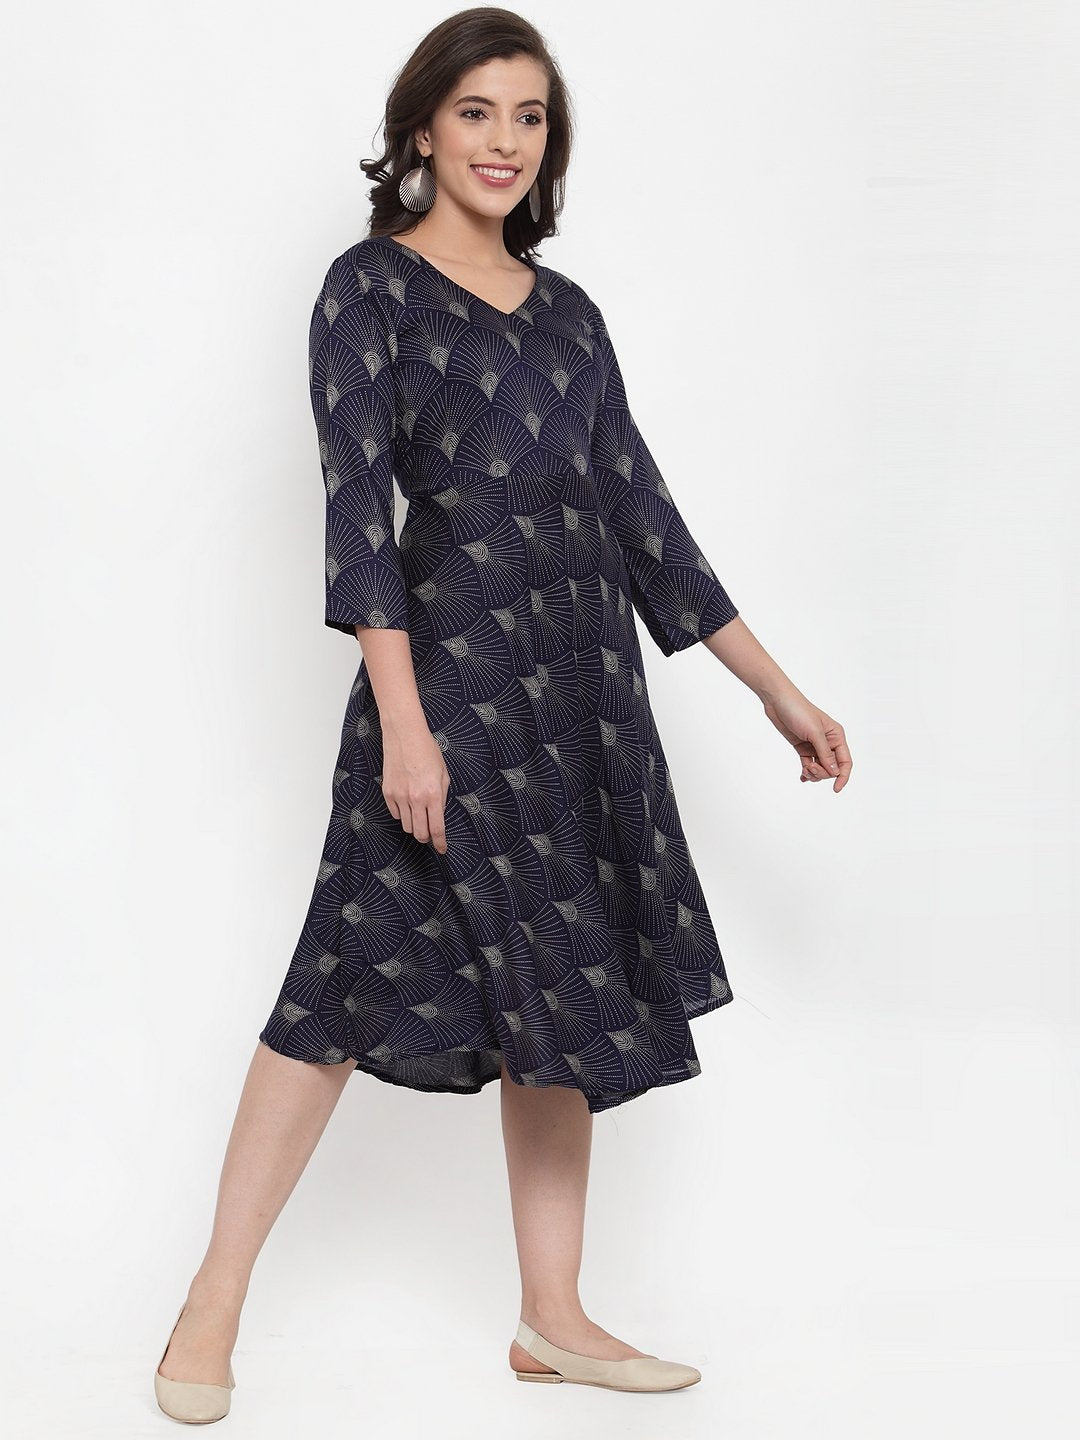 Women's Navy Blue Printed Fit and Flare Ethnic Dress - Jompers